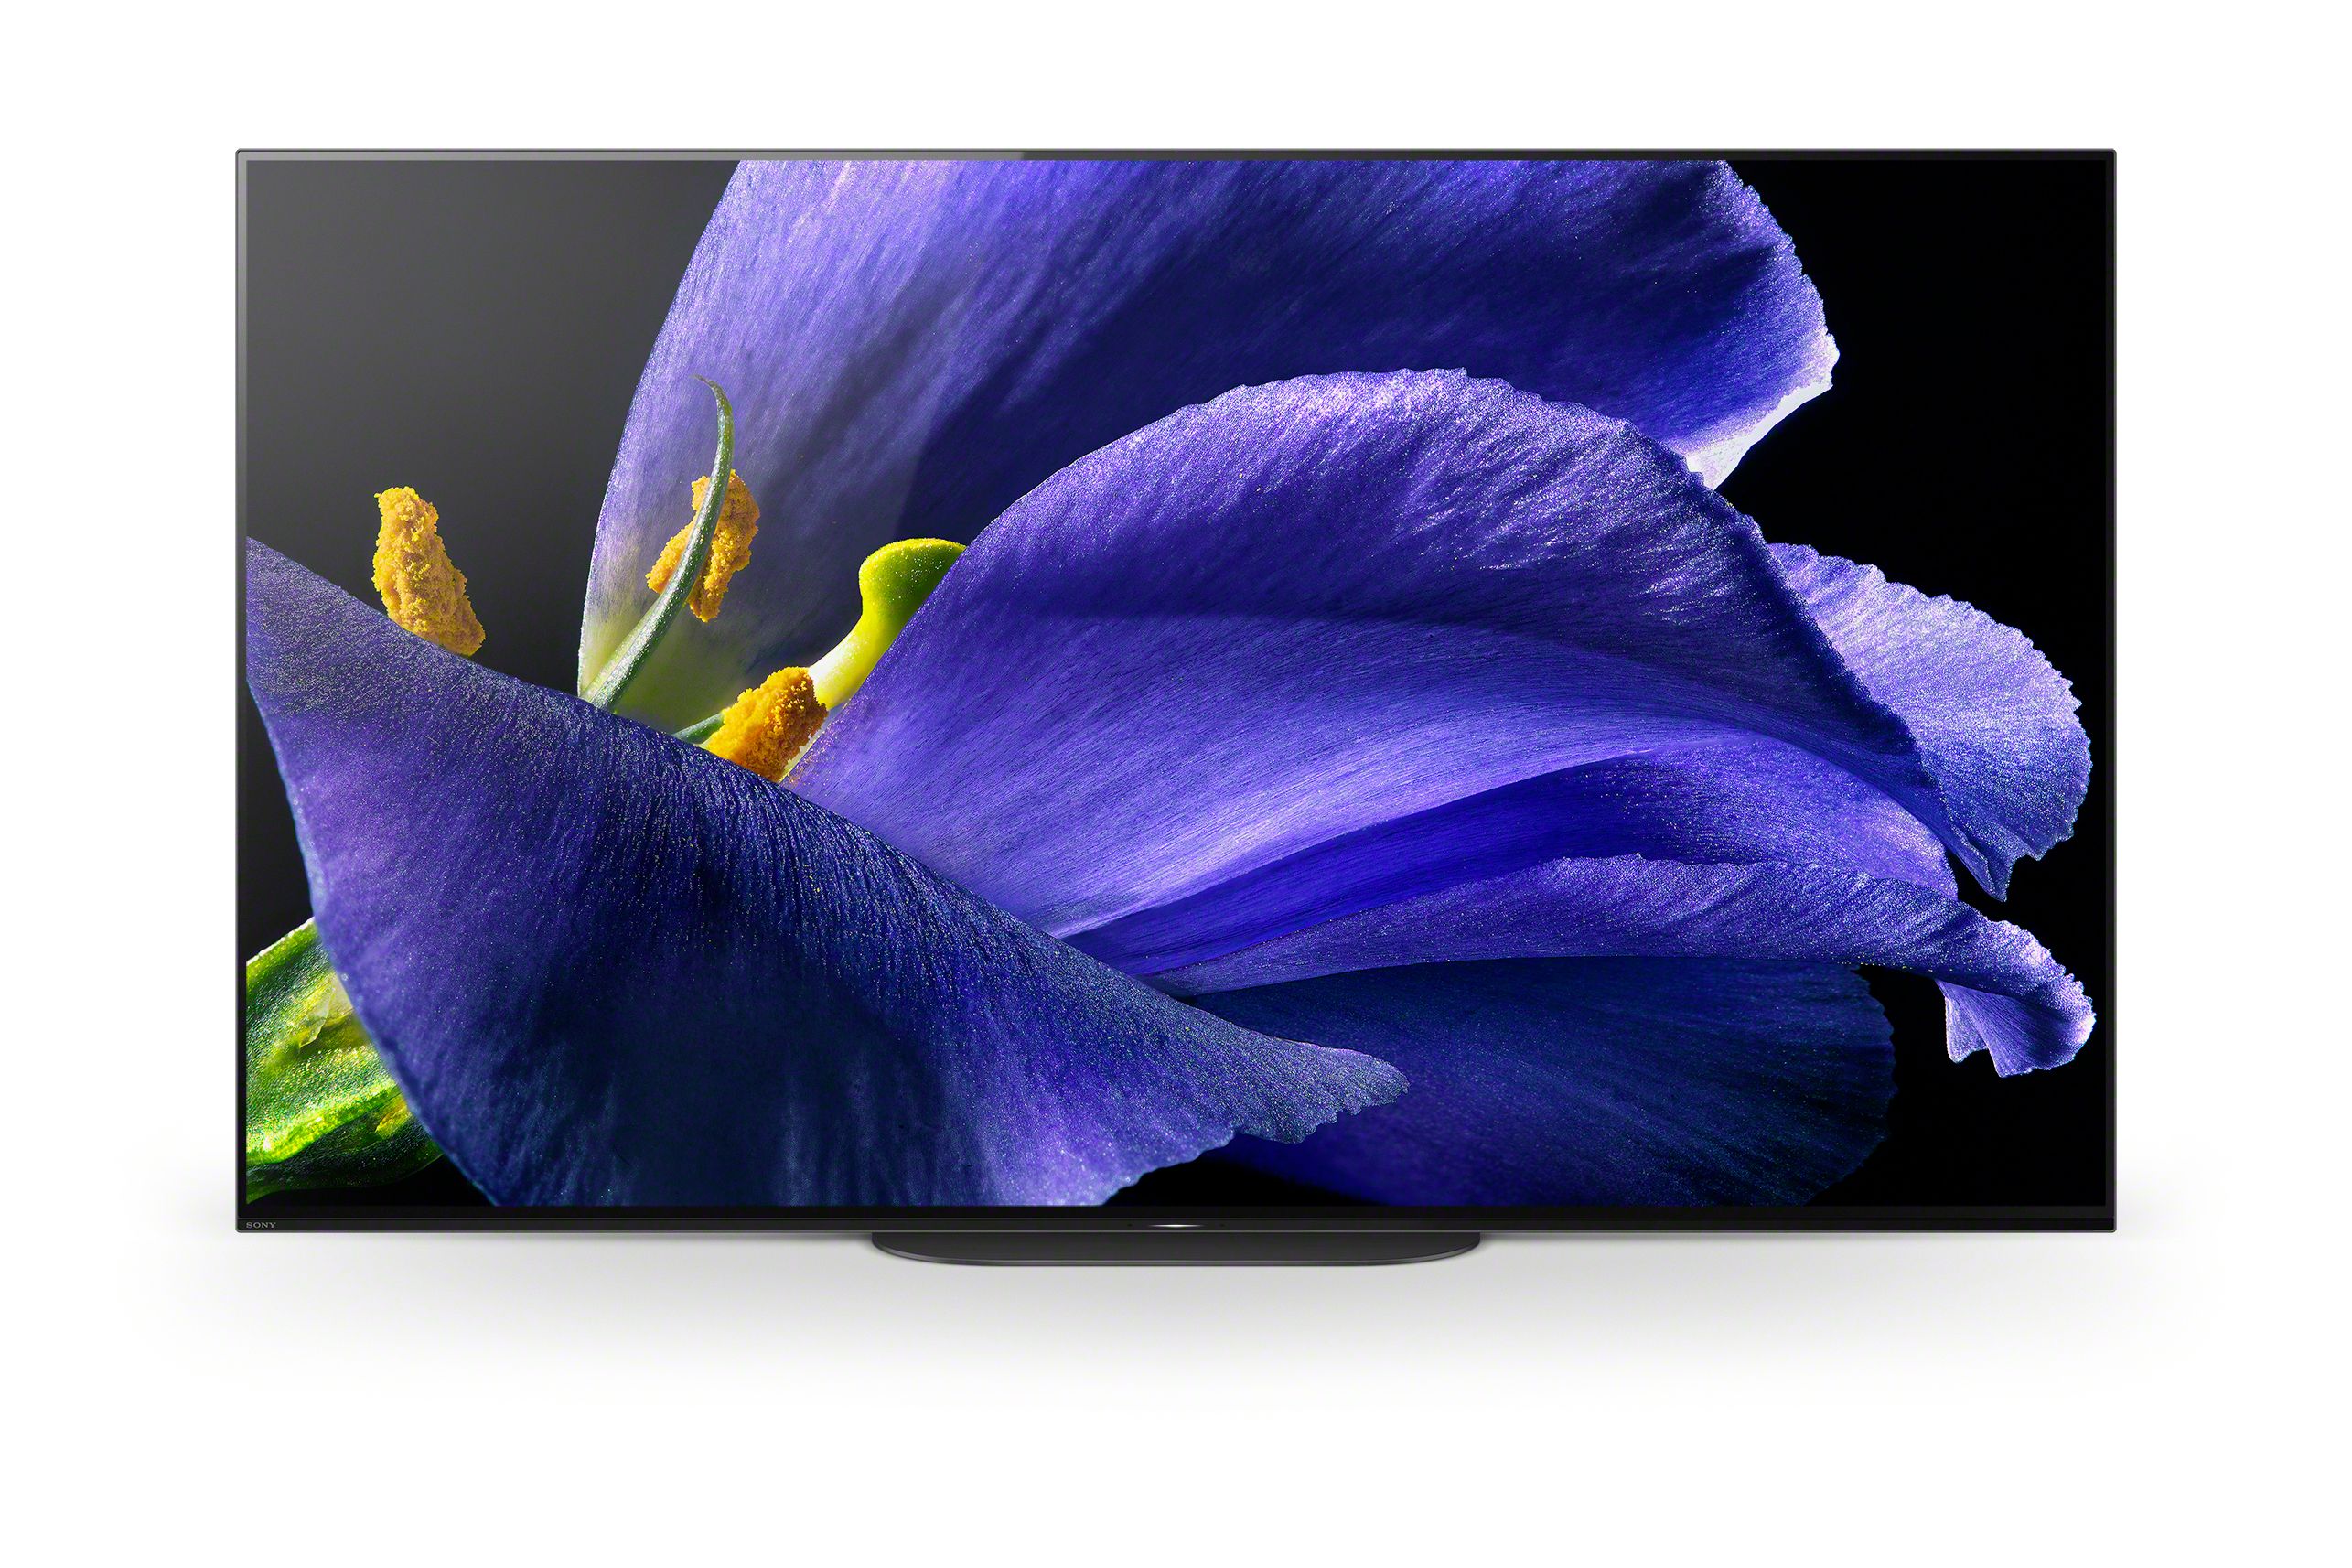 Sony 65" Class XBR65A9G 4K UHD OLED Android Smart TV HDR BRAVIA A9G Series - image 1 of 15